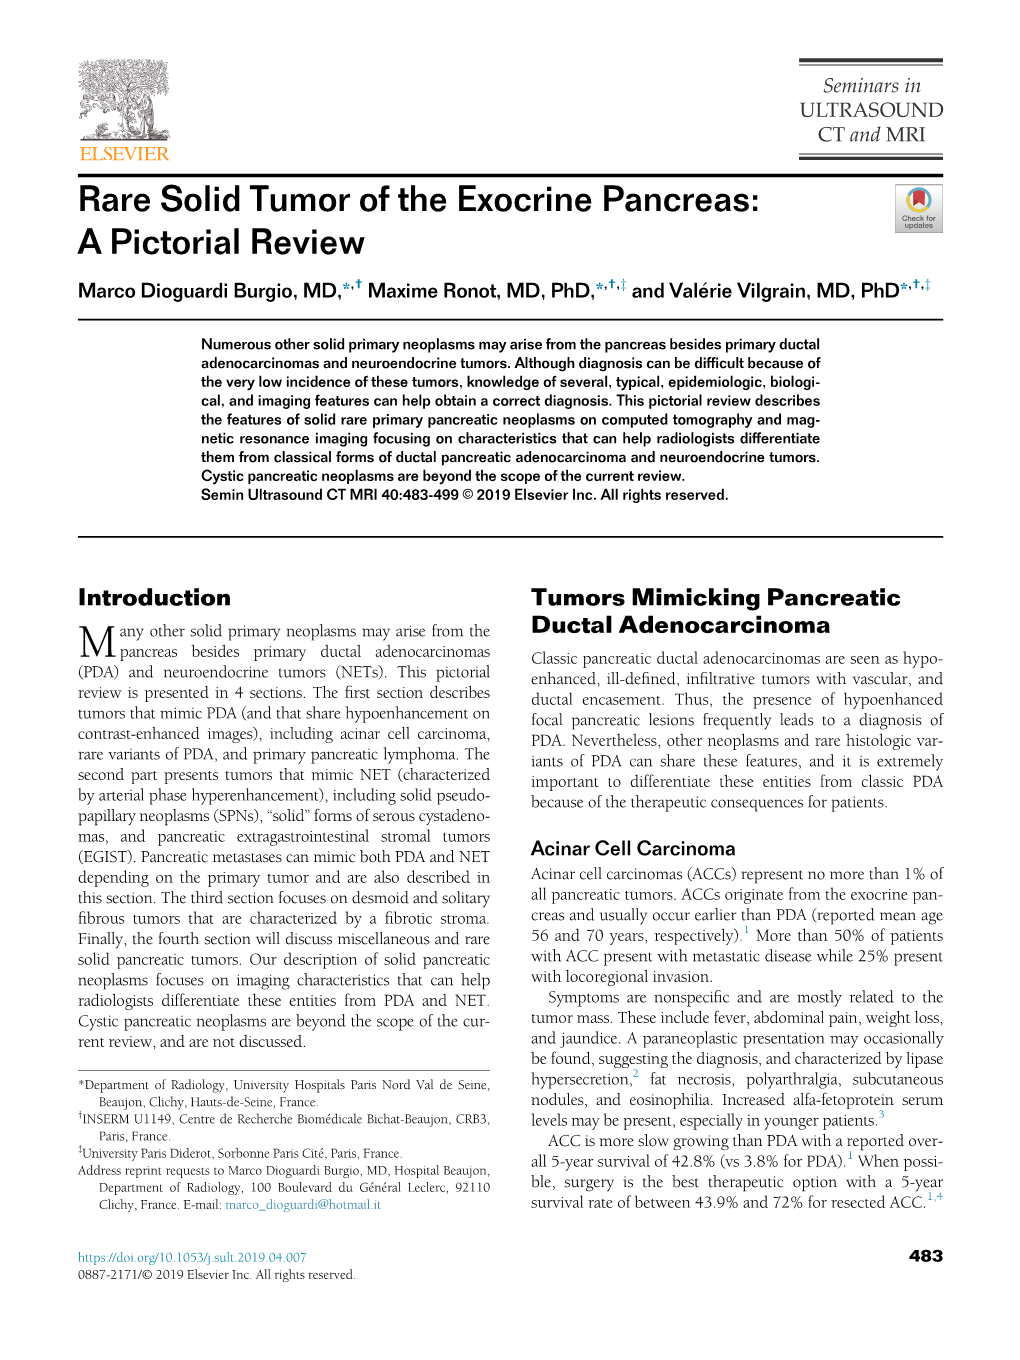 Rare Solid Tumor of the Exocrine Pancreas: a Pictorial Review Marco Dioguardi Burgio, MD,*,† Maxime Ronot, MD, Phd,*,†,Z and Valerie� Vilgrain, MD, Phd*,†,Z